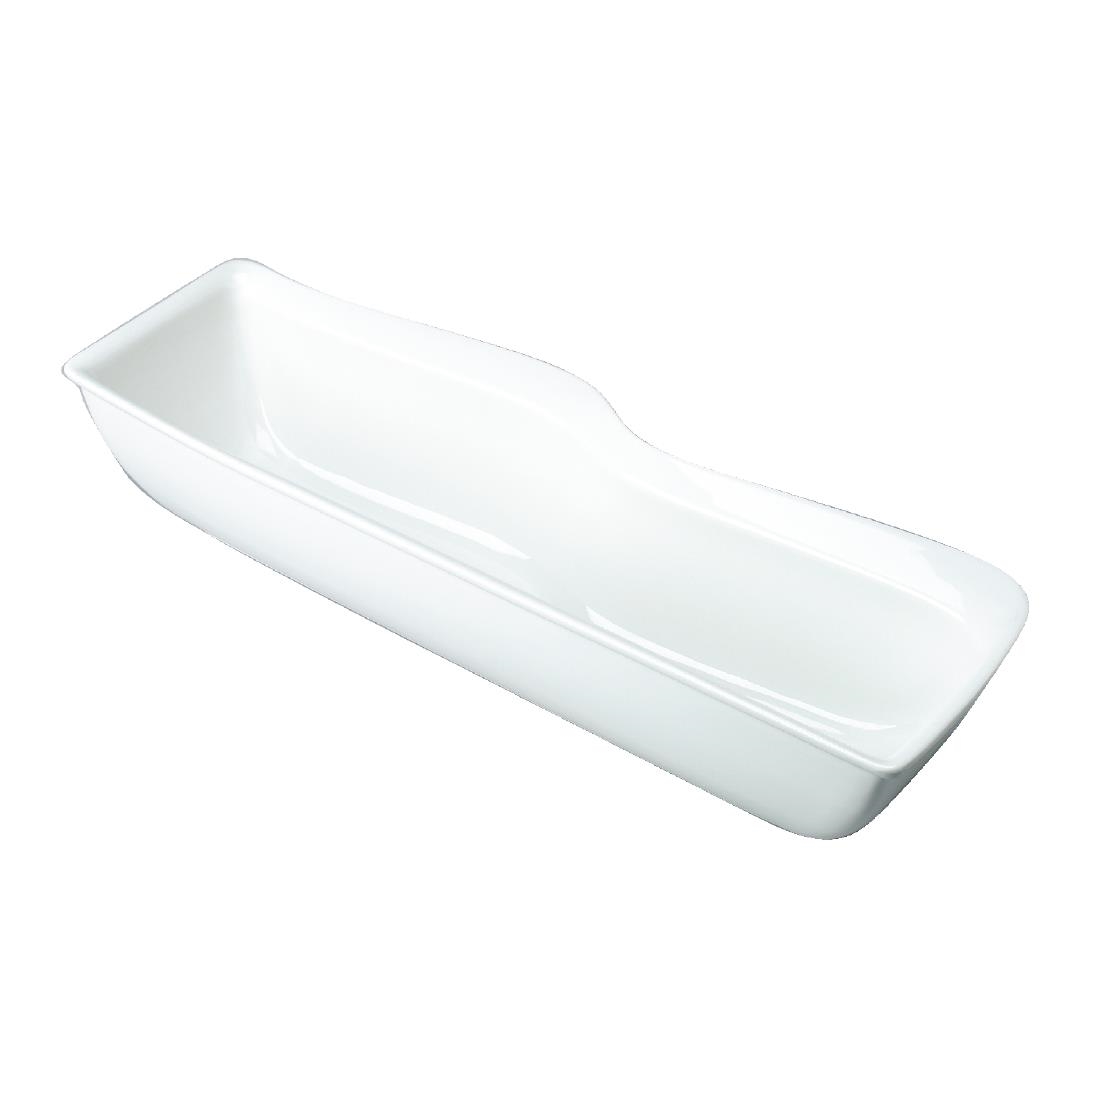 Churchill Alchemy Counterwave Serving Dishes 500x 160mm (Pack of 2)